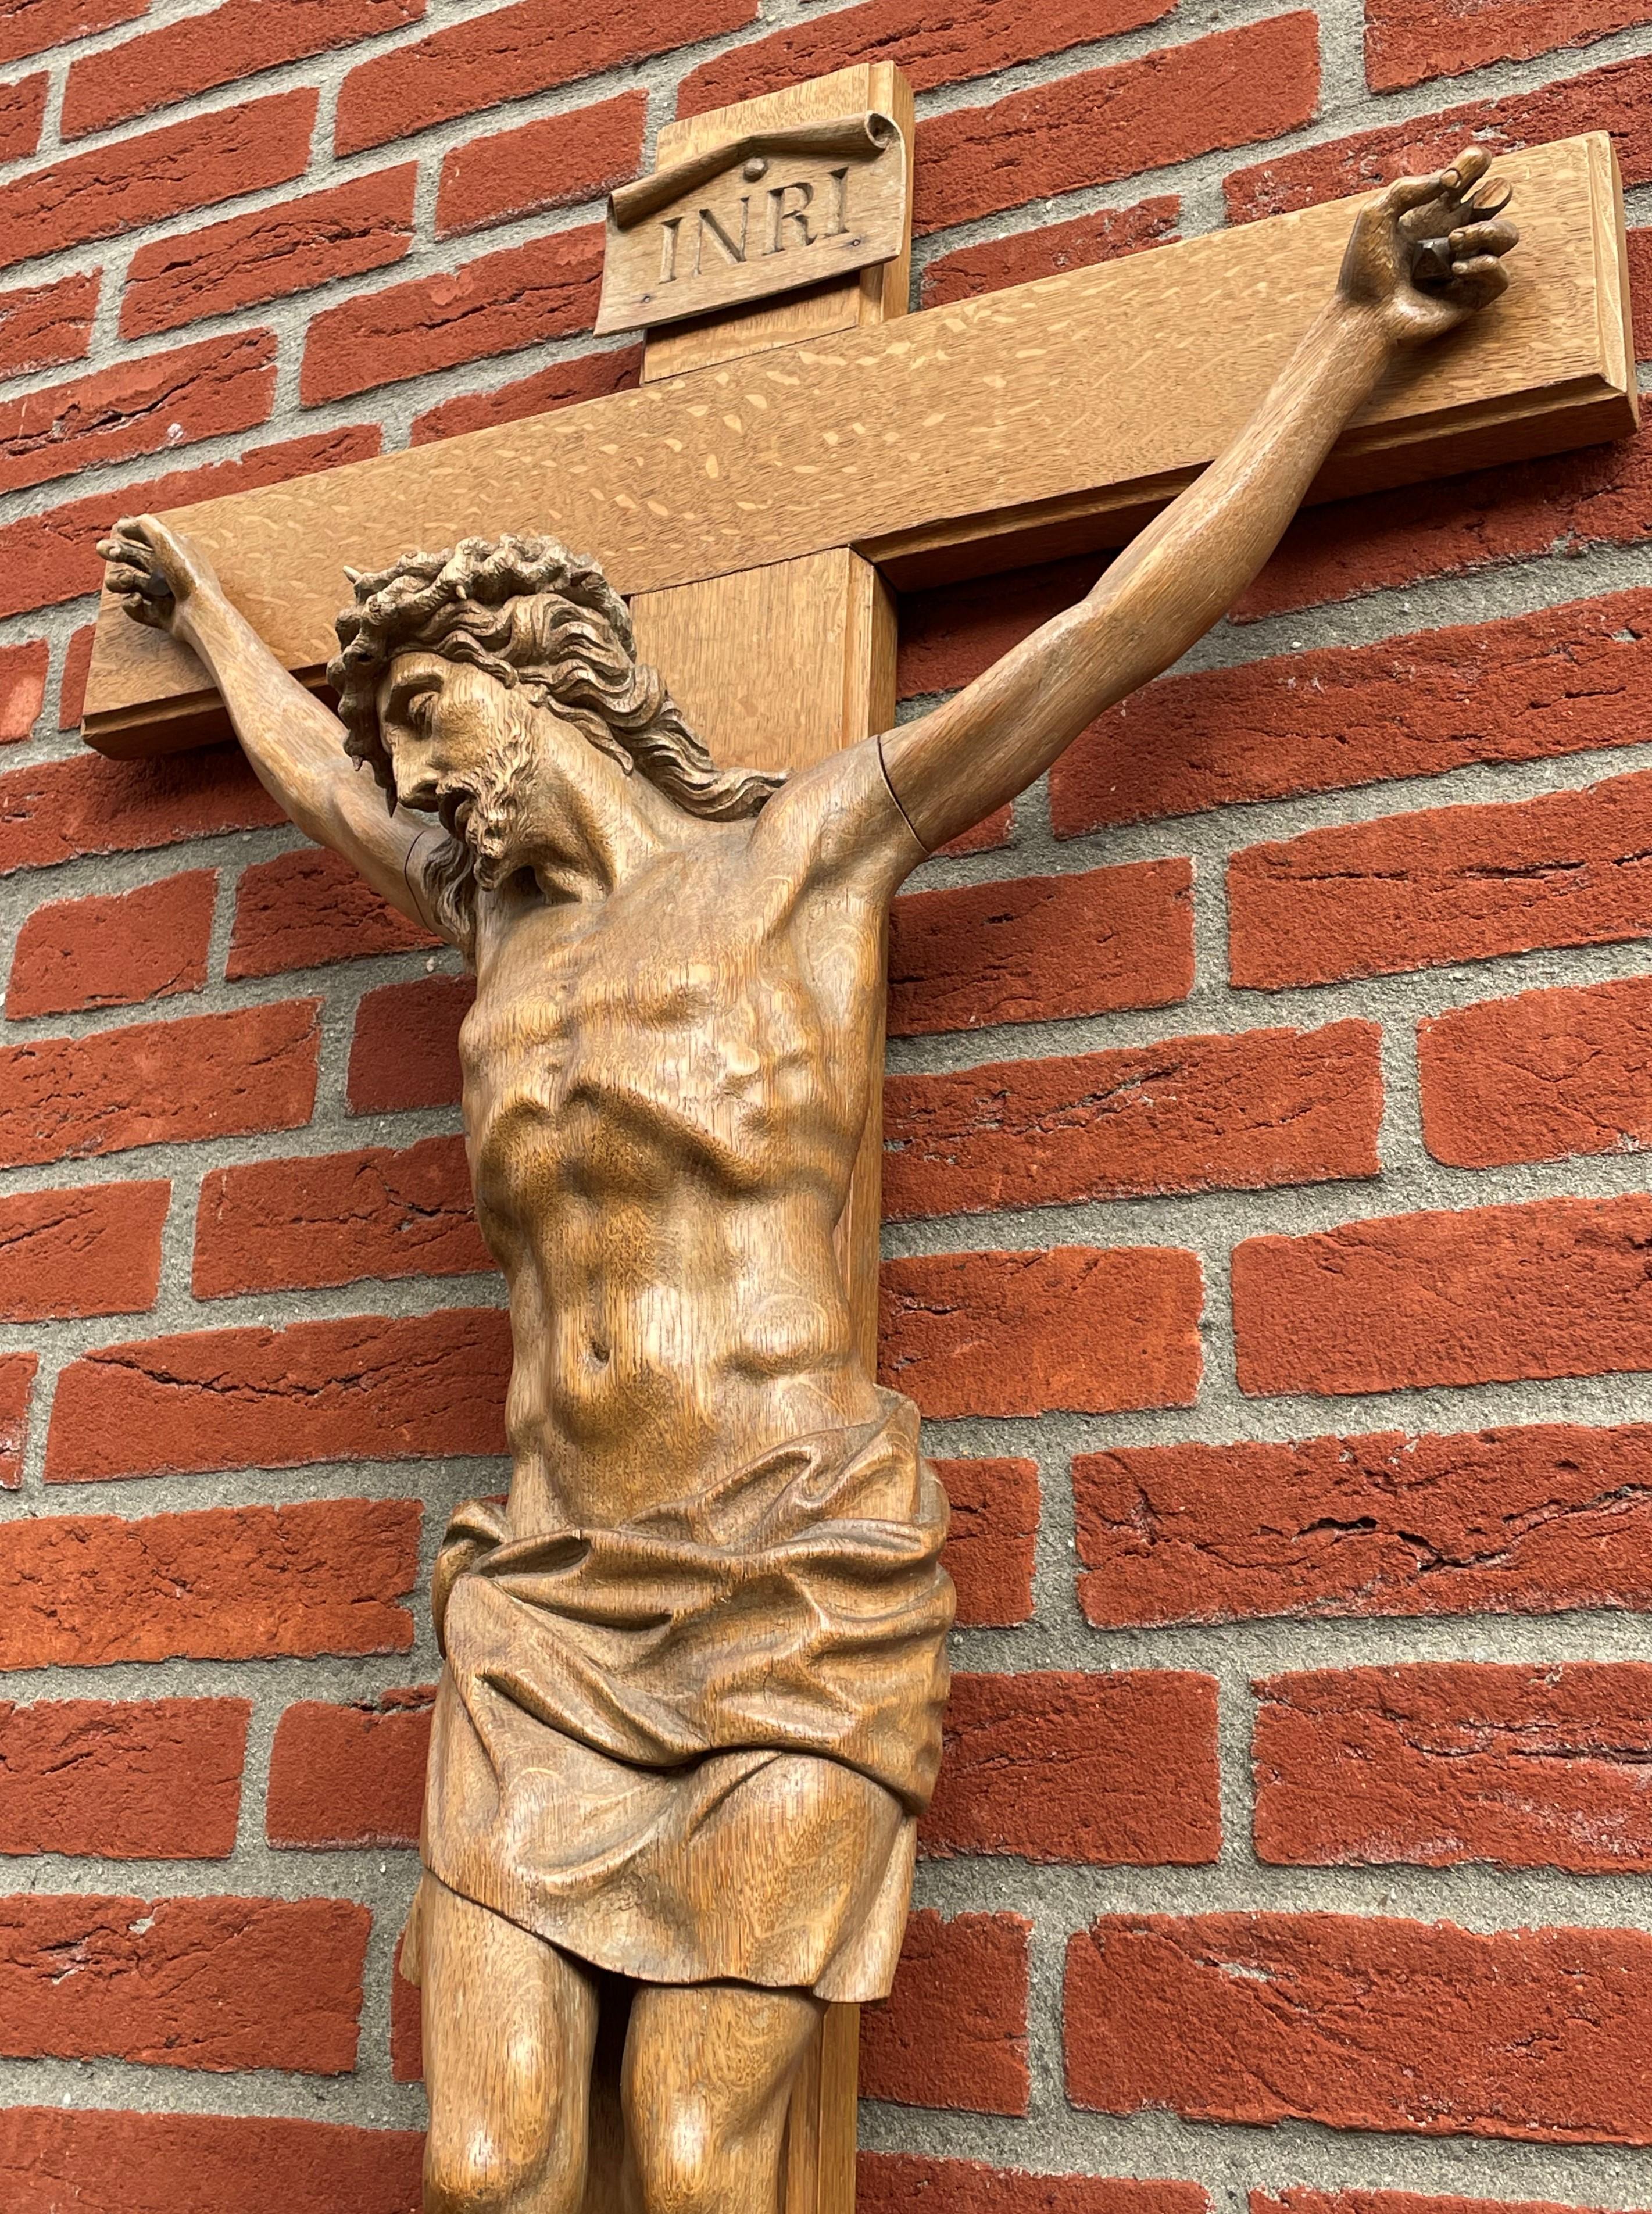 Large antique crucifix with superb workmanship oak corpus of Christ, Mid 1800s.

In the course of the past three years we have offered and sold a number of top-quality crafted church relics that were part of an extensive private collection. This